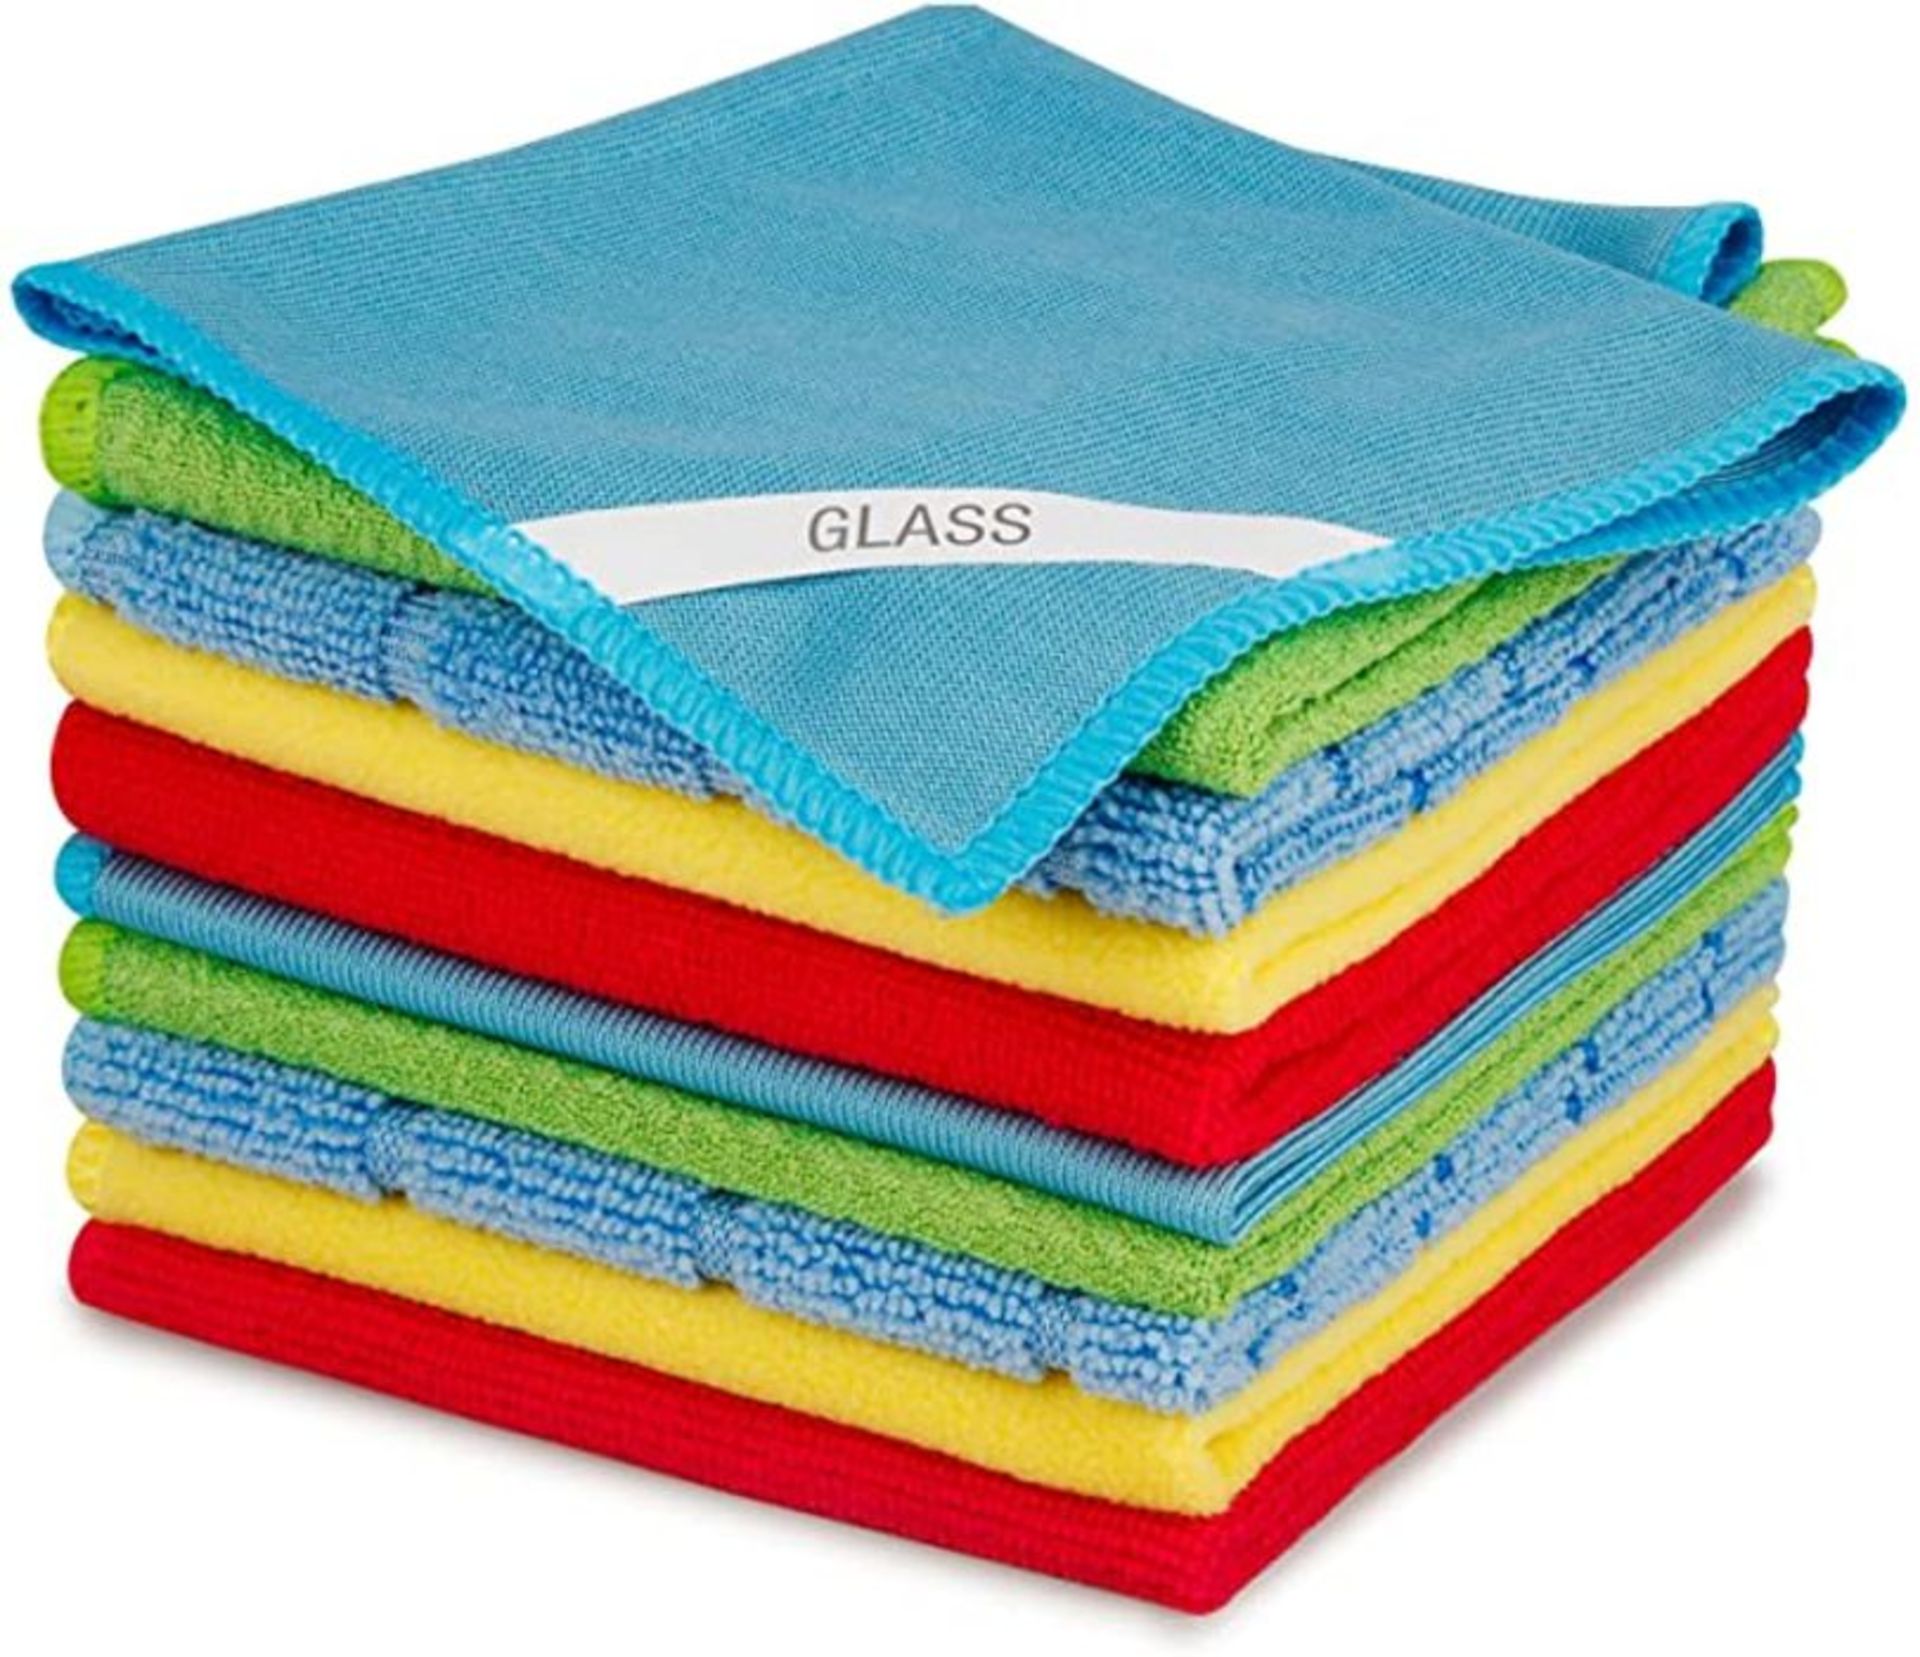 SEVENMAX Microfibre Cleaning Cloths, Multifunctional Cleaning Towels 10 Pack Rags with Label for